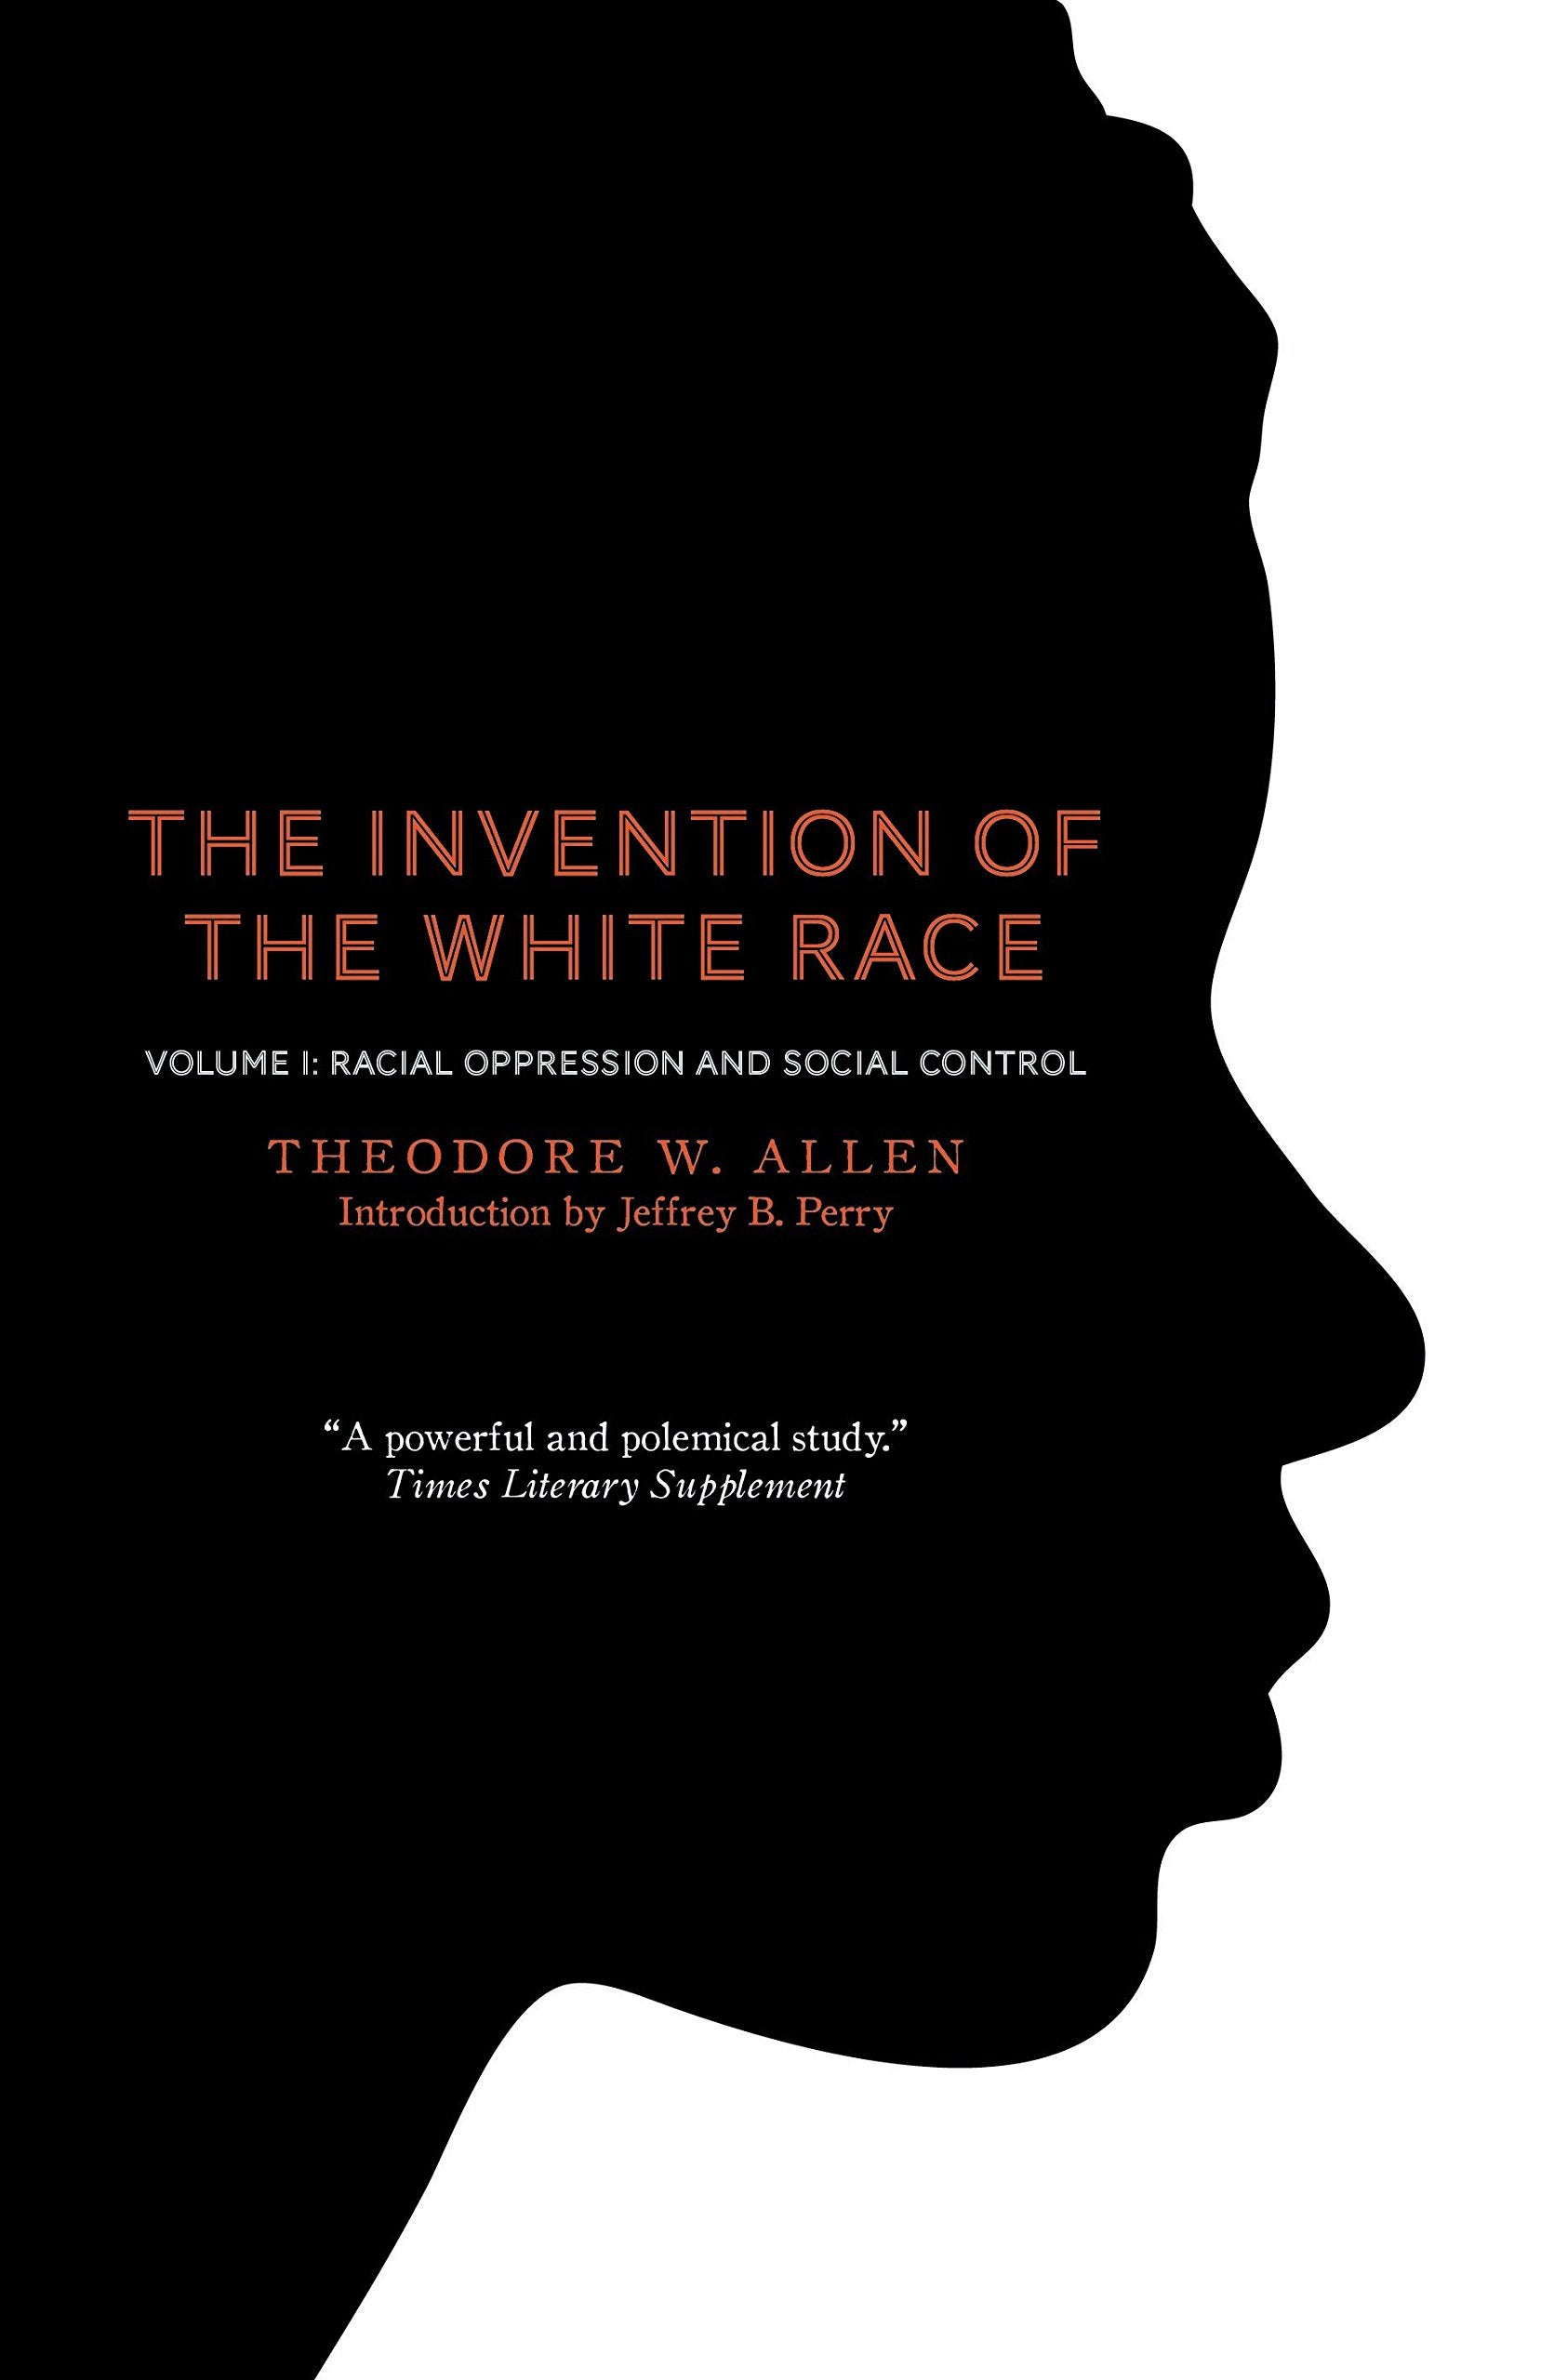 Image of the cover of The Invention of the White Race (Verso, 1994) by Theodore W. Allen